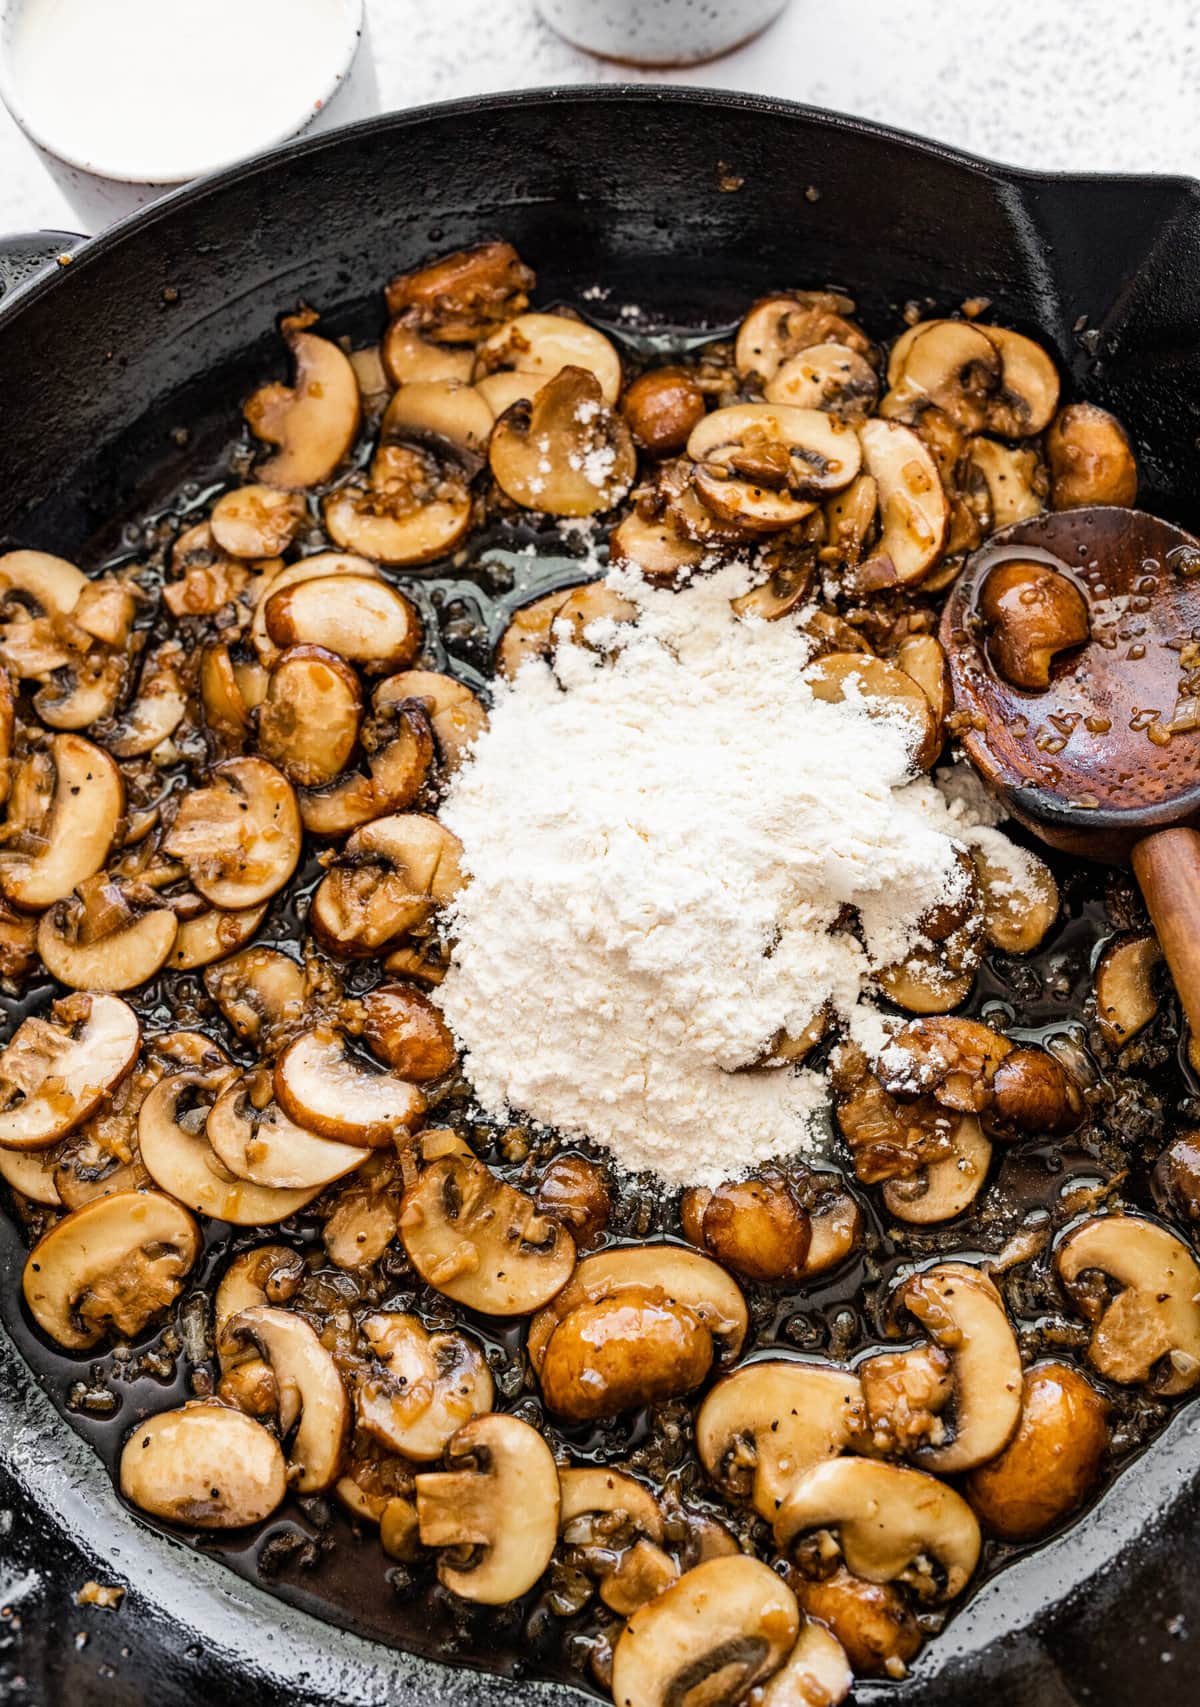 How to make best Steak Marsala recipe step-by-step: adding flour to cooked mushrooms to make roux.